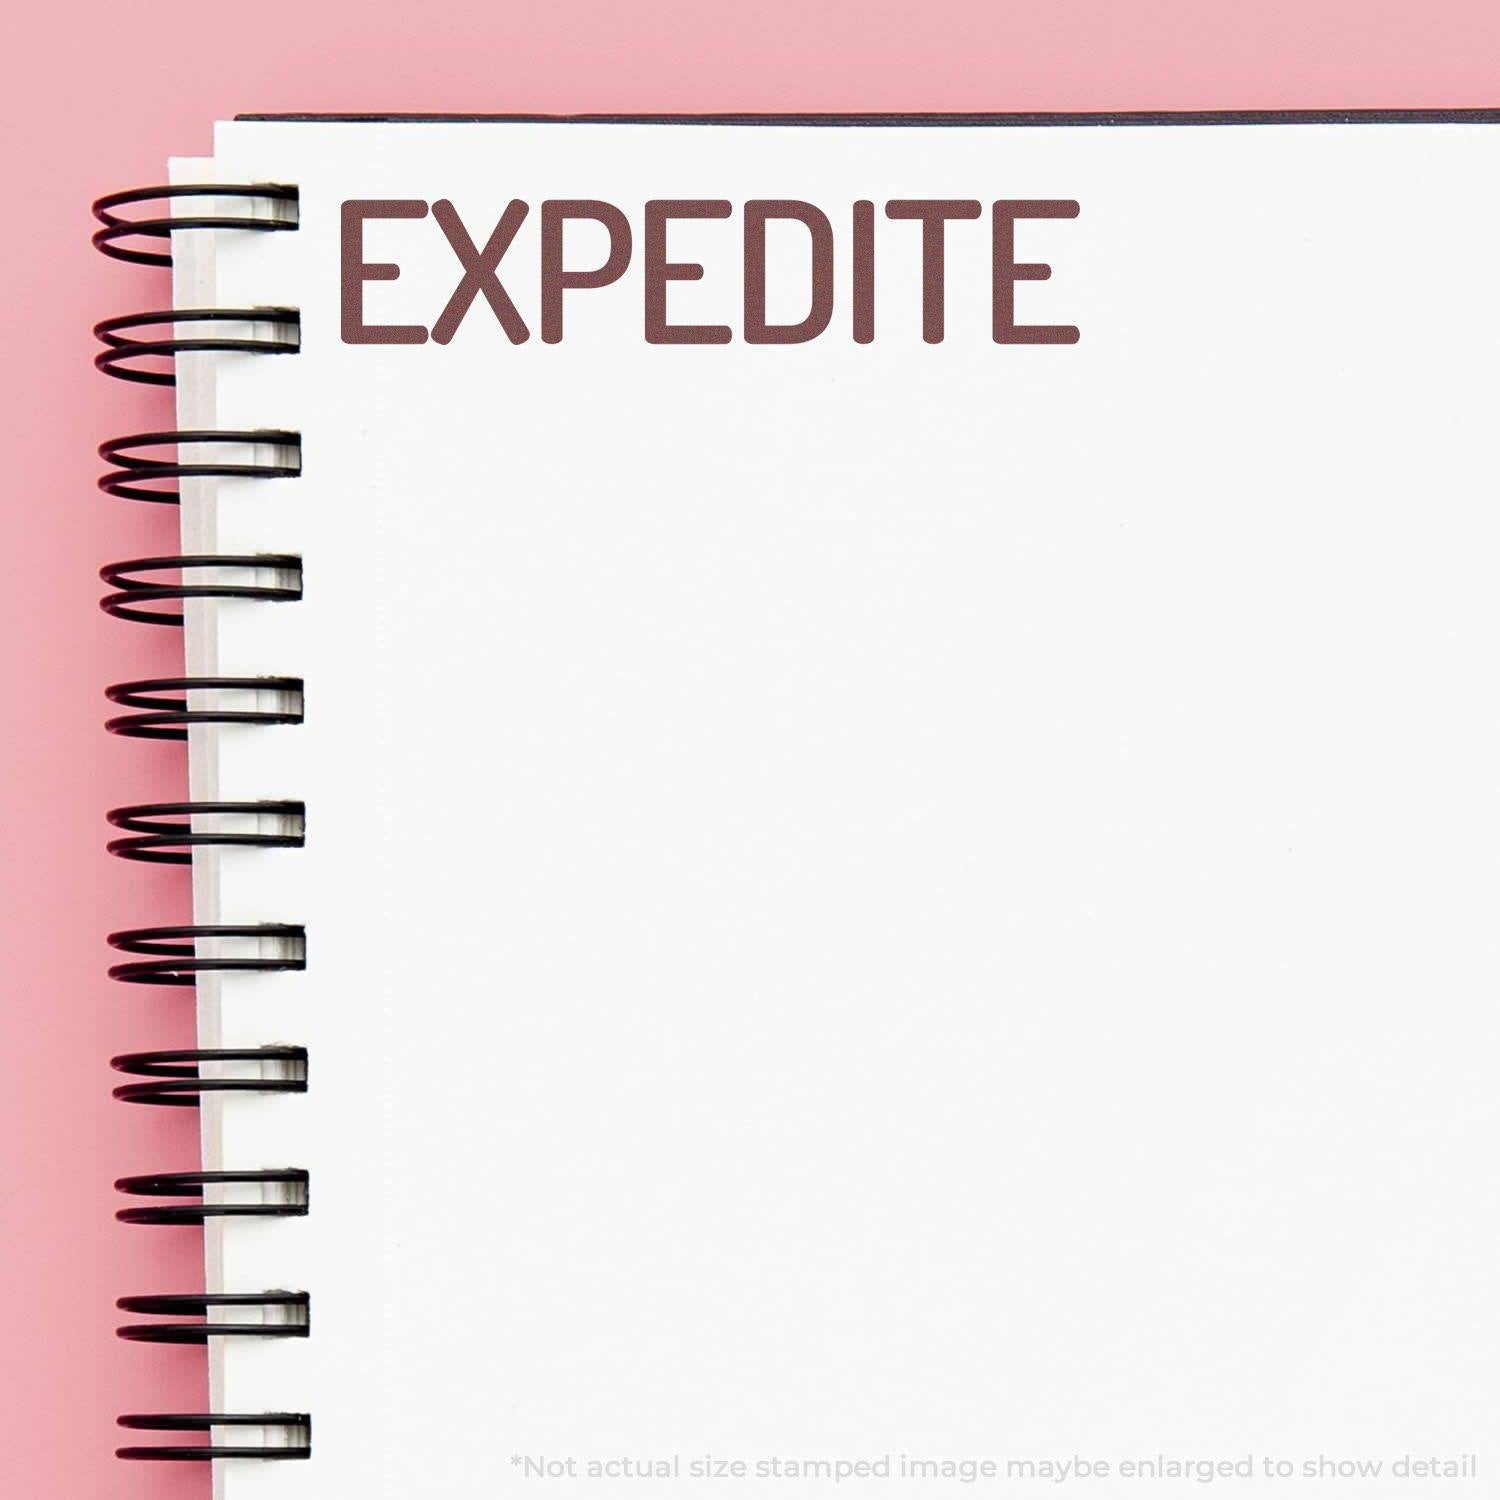 A stock office rubber stamp with a stamped image showing how the text "EXPEDITE" in a large narrow font is displayed after stamping.